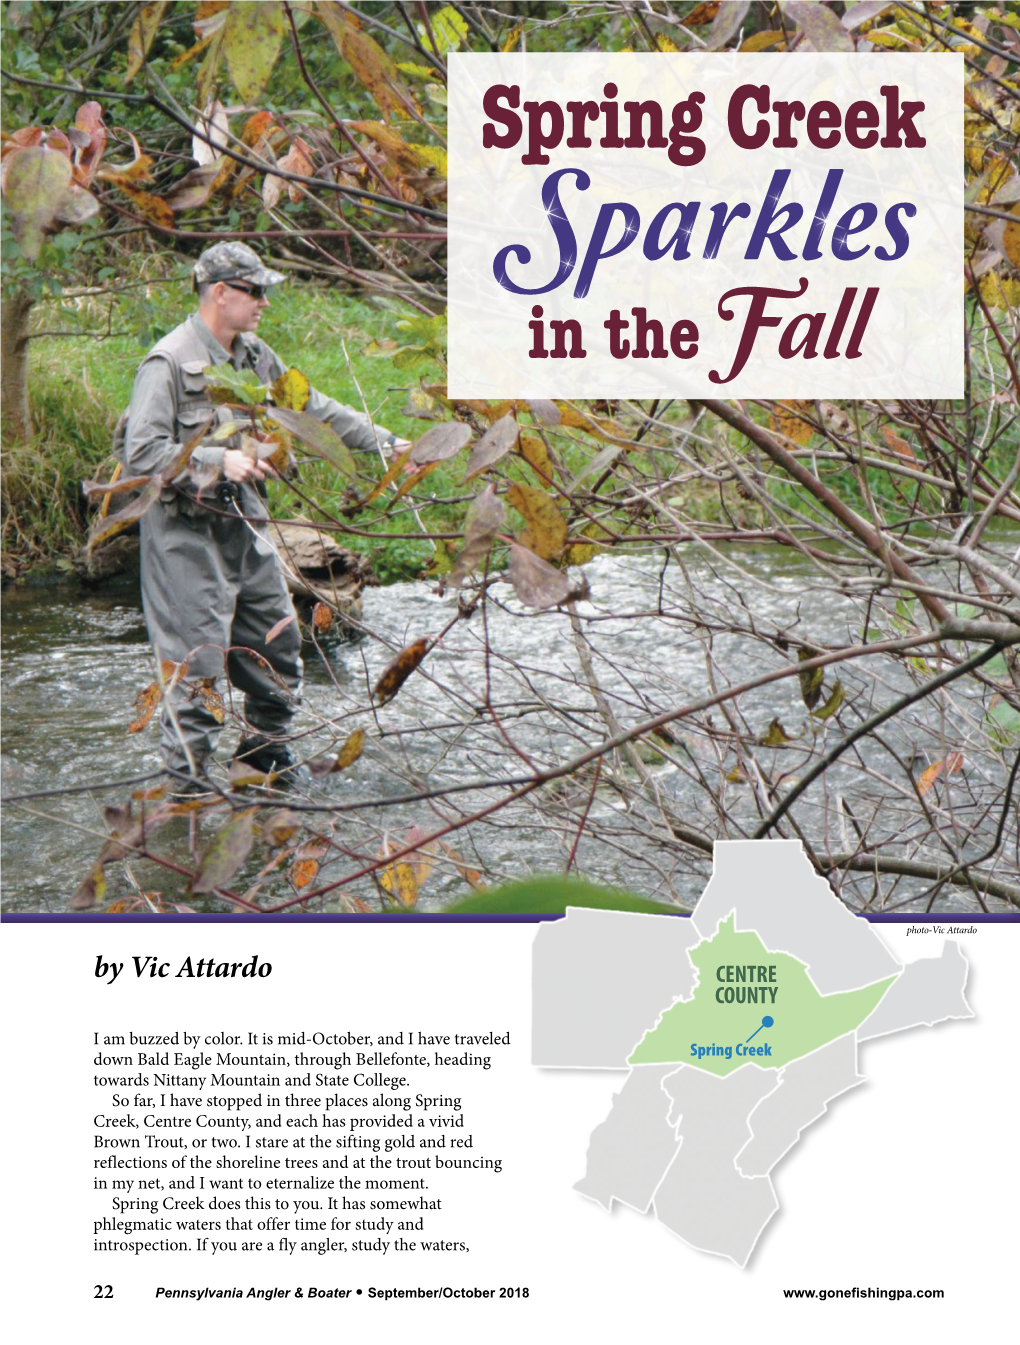 Spring Creek Sparkles in the Fall